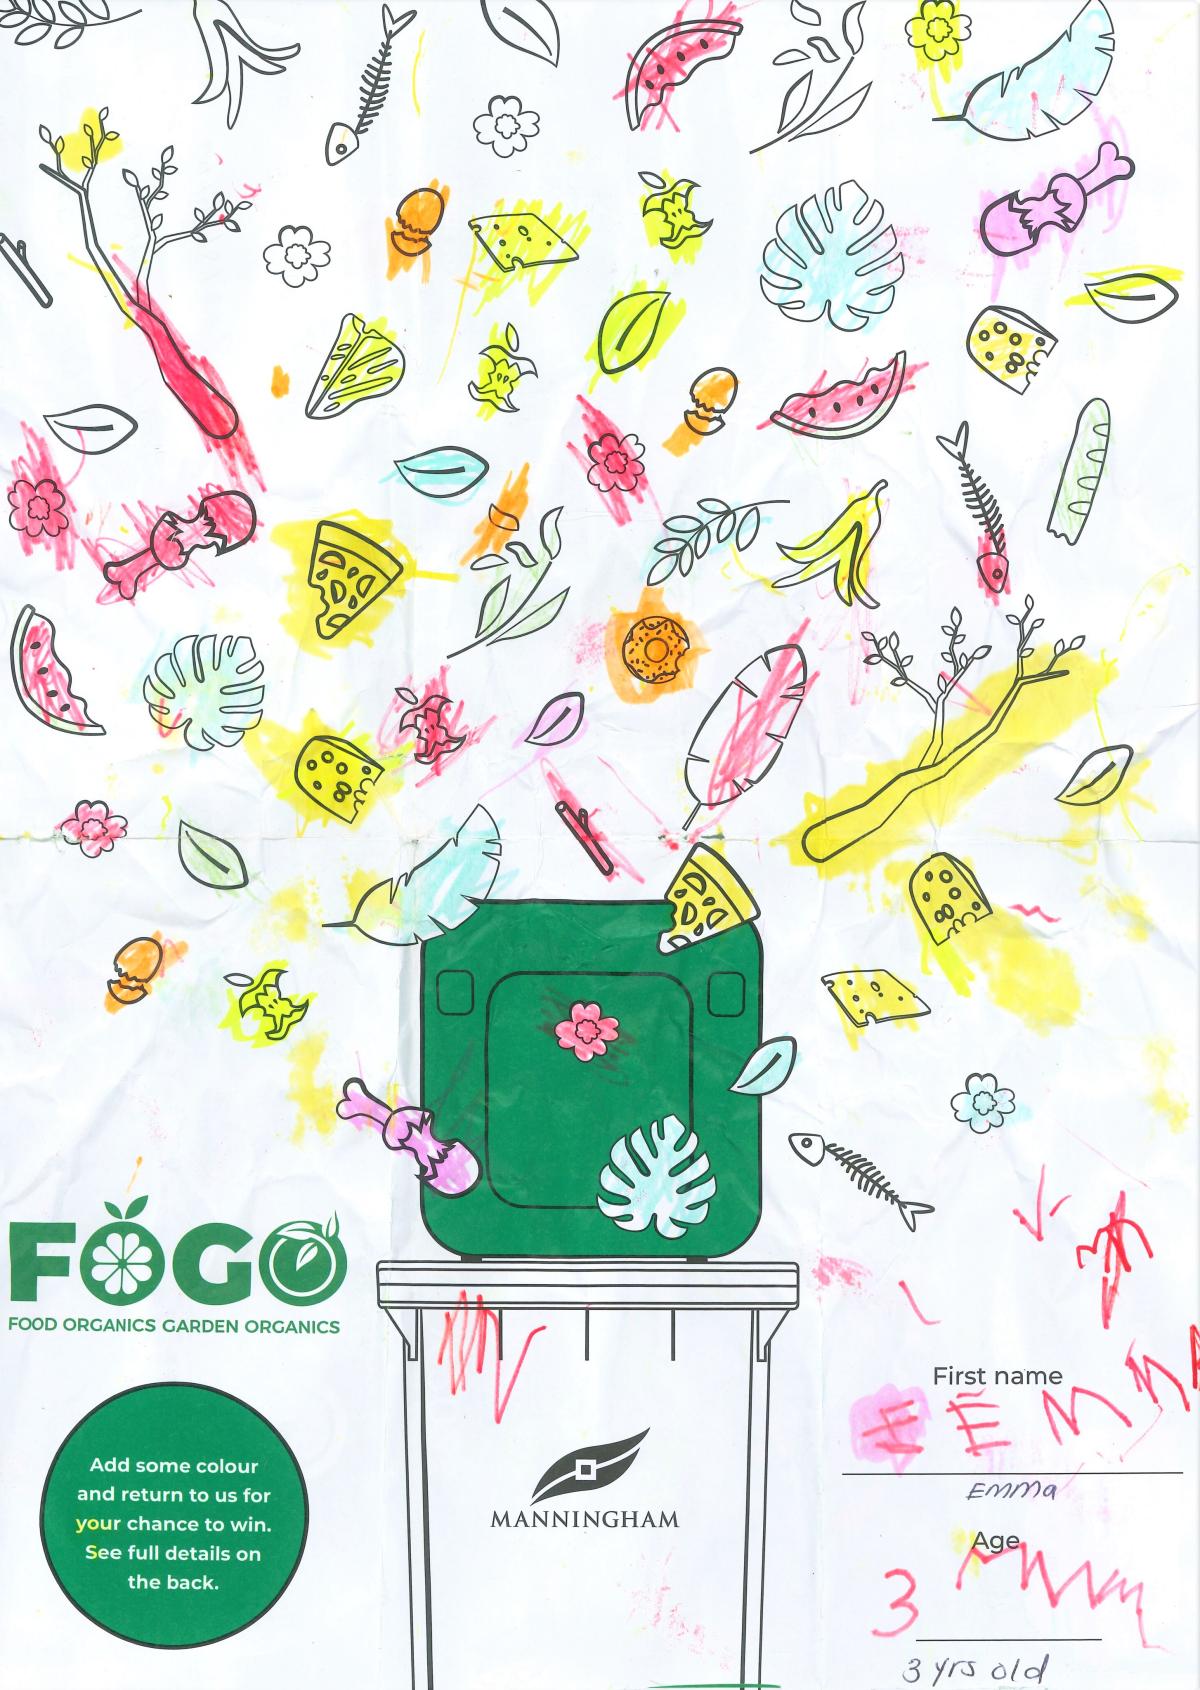 An image of a FOGO bin with all sorts of organic rubbish falling into it from above. The name 'Emma' is in the bottom right corner.